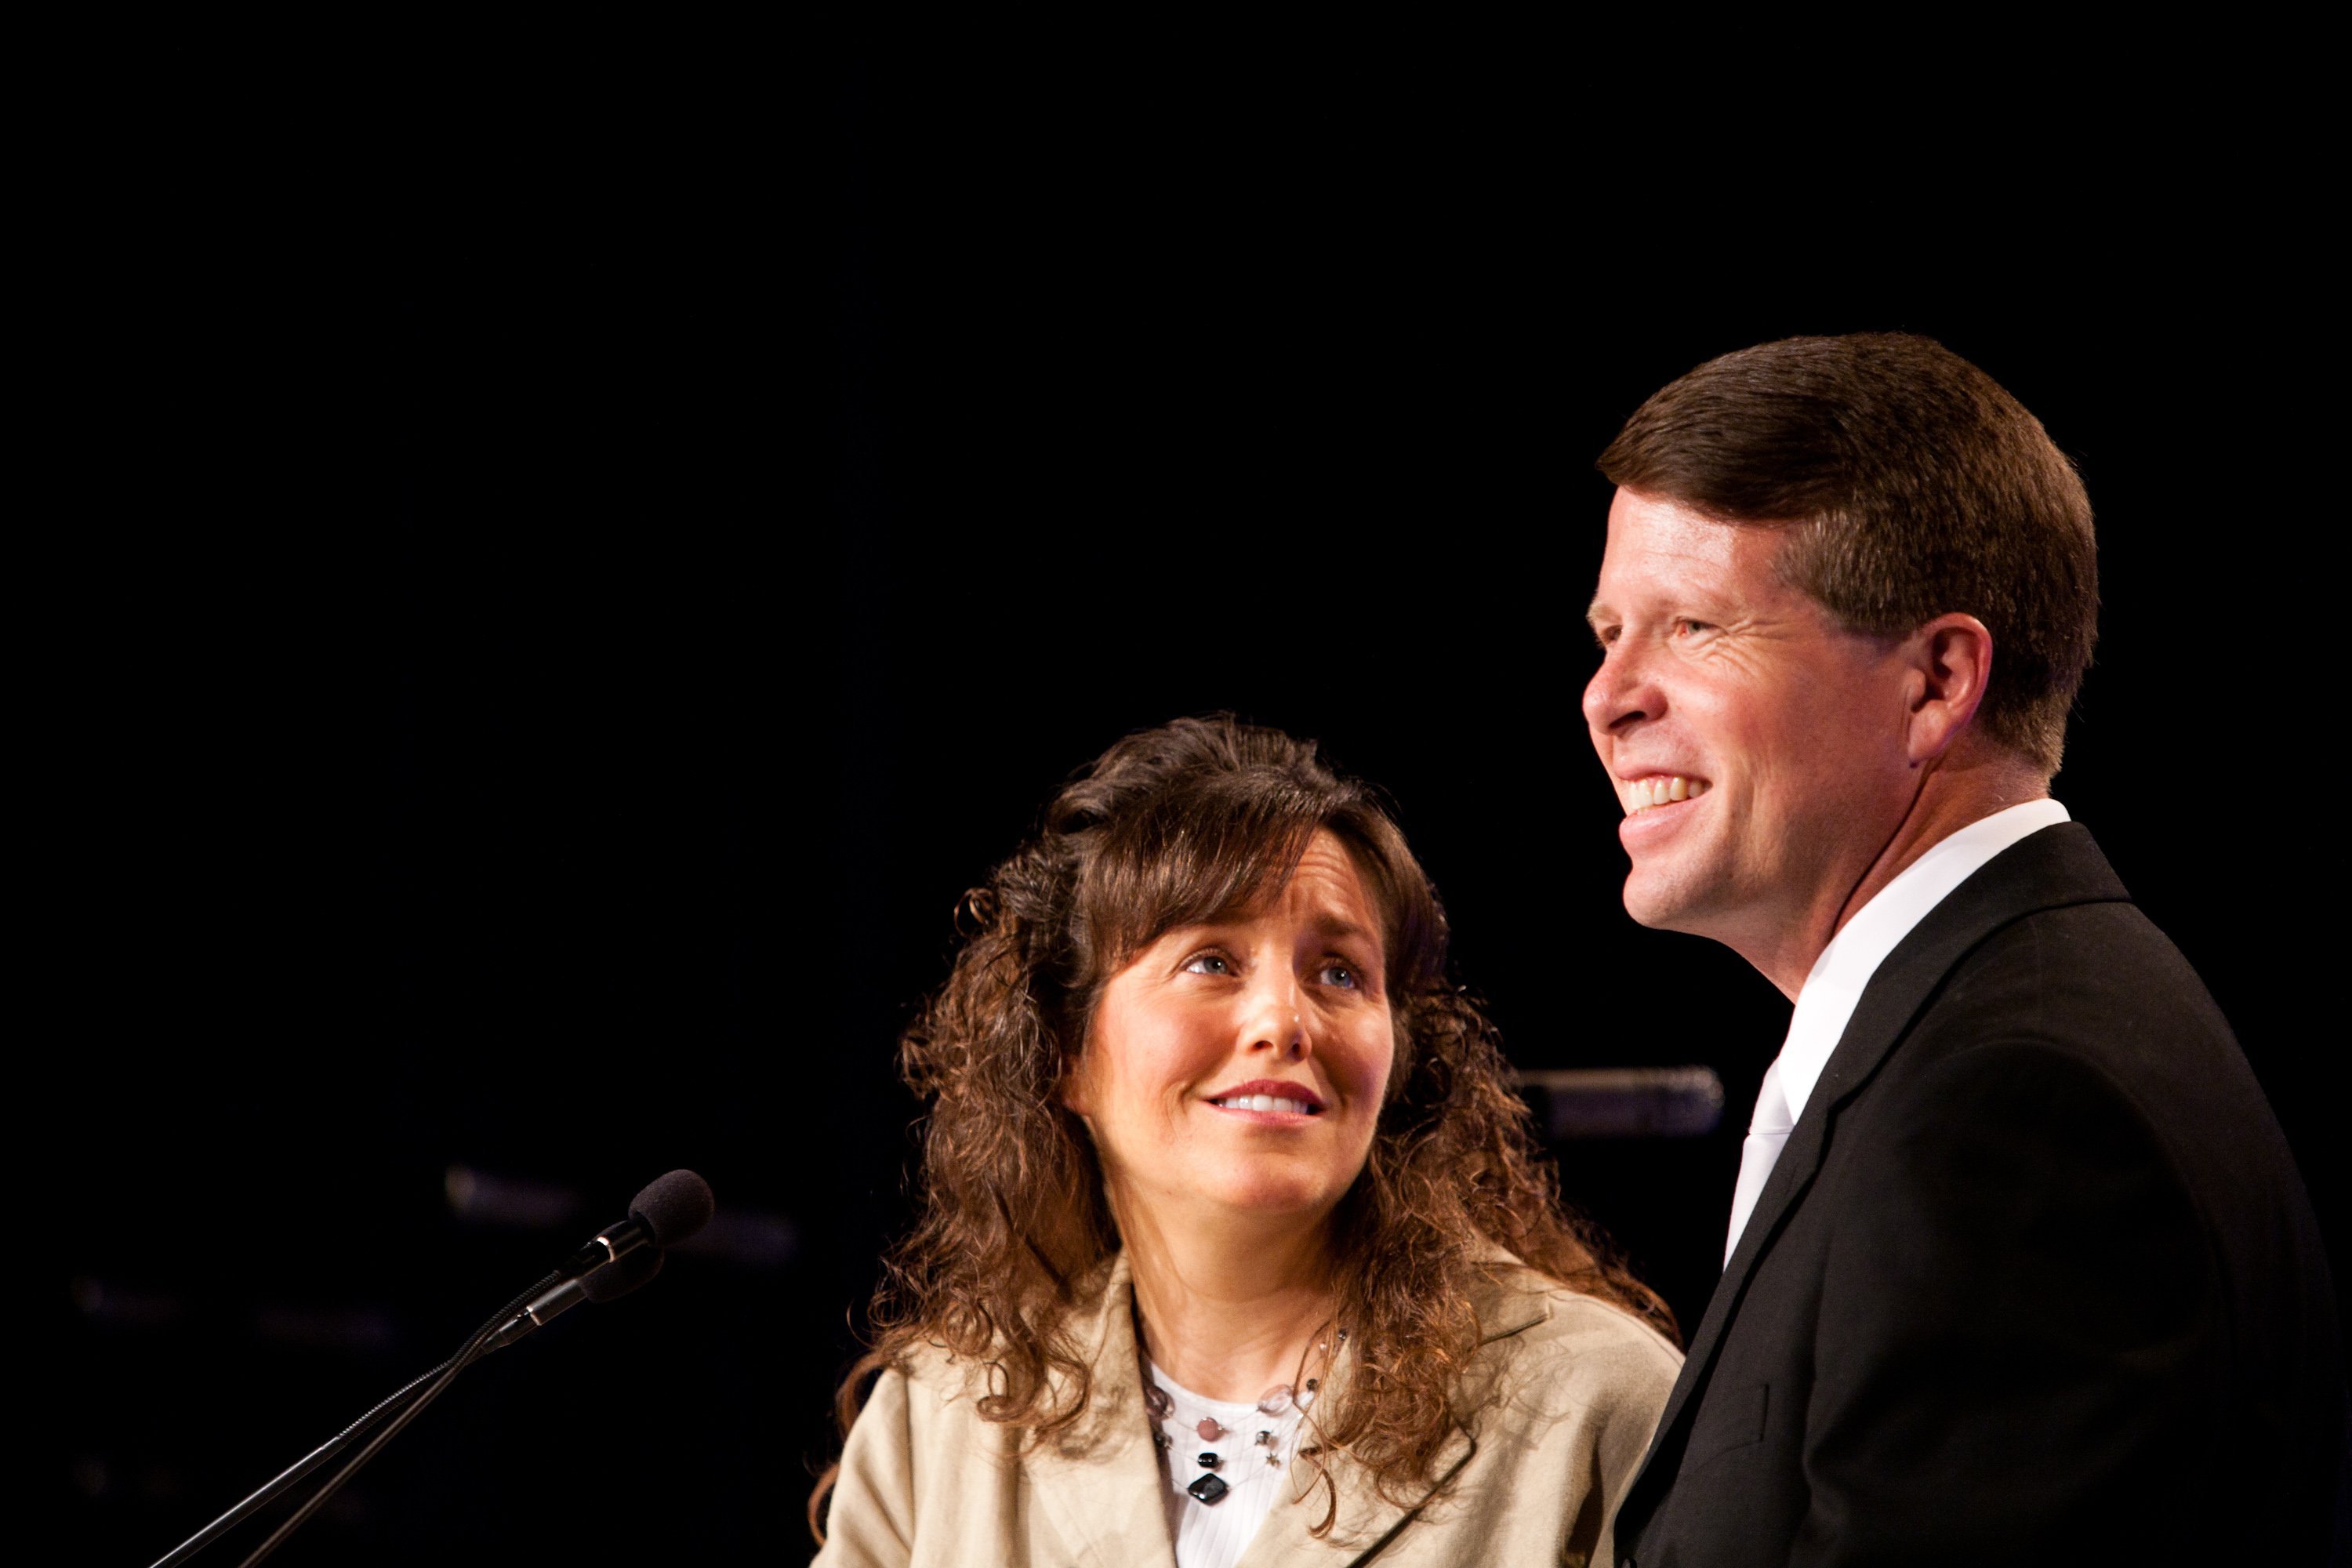 Michelle Duggar and Jim Bob Duggar speak at the Values Voter Summit in Washington, D.C., on September 17, 2010 | Photo: Getty Images